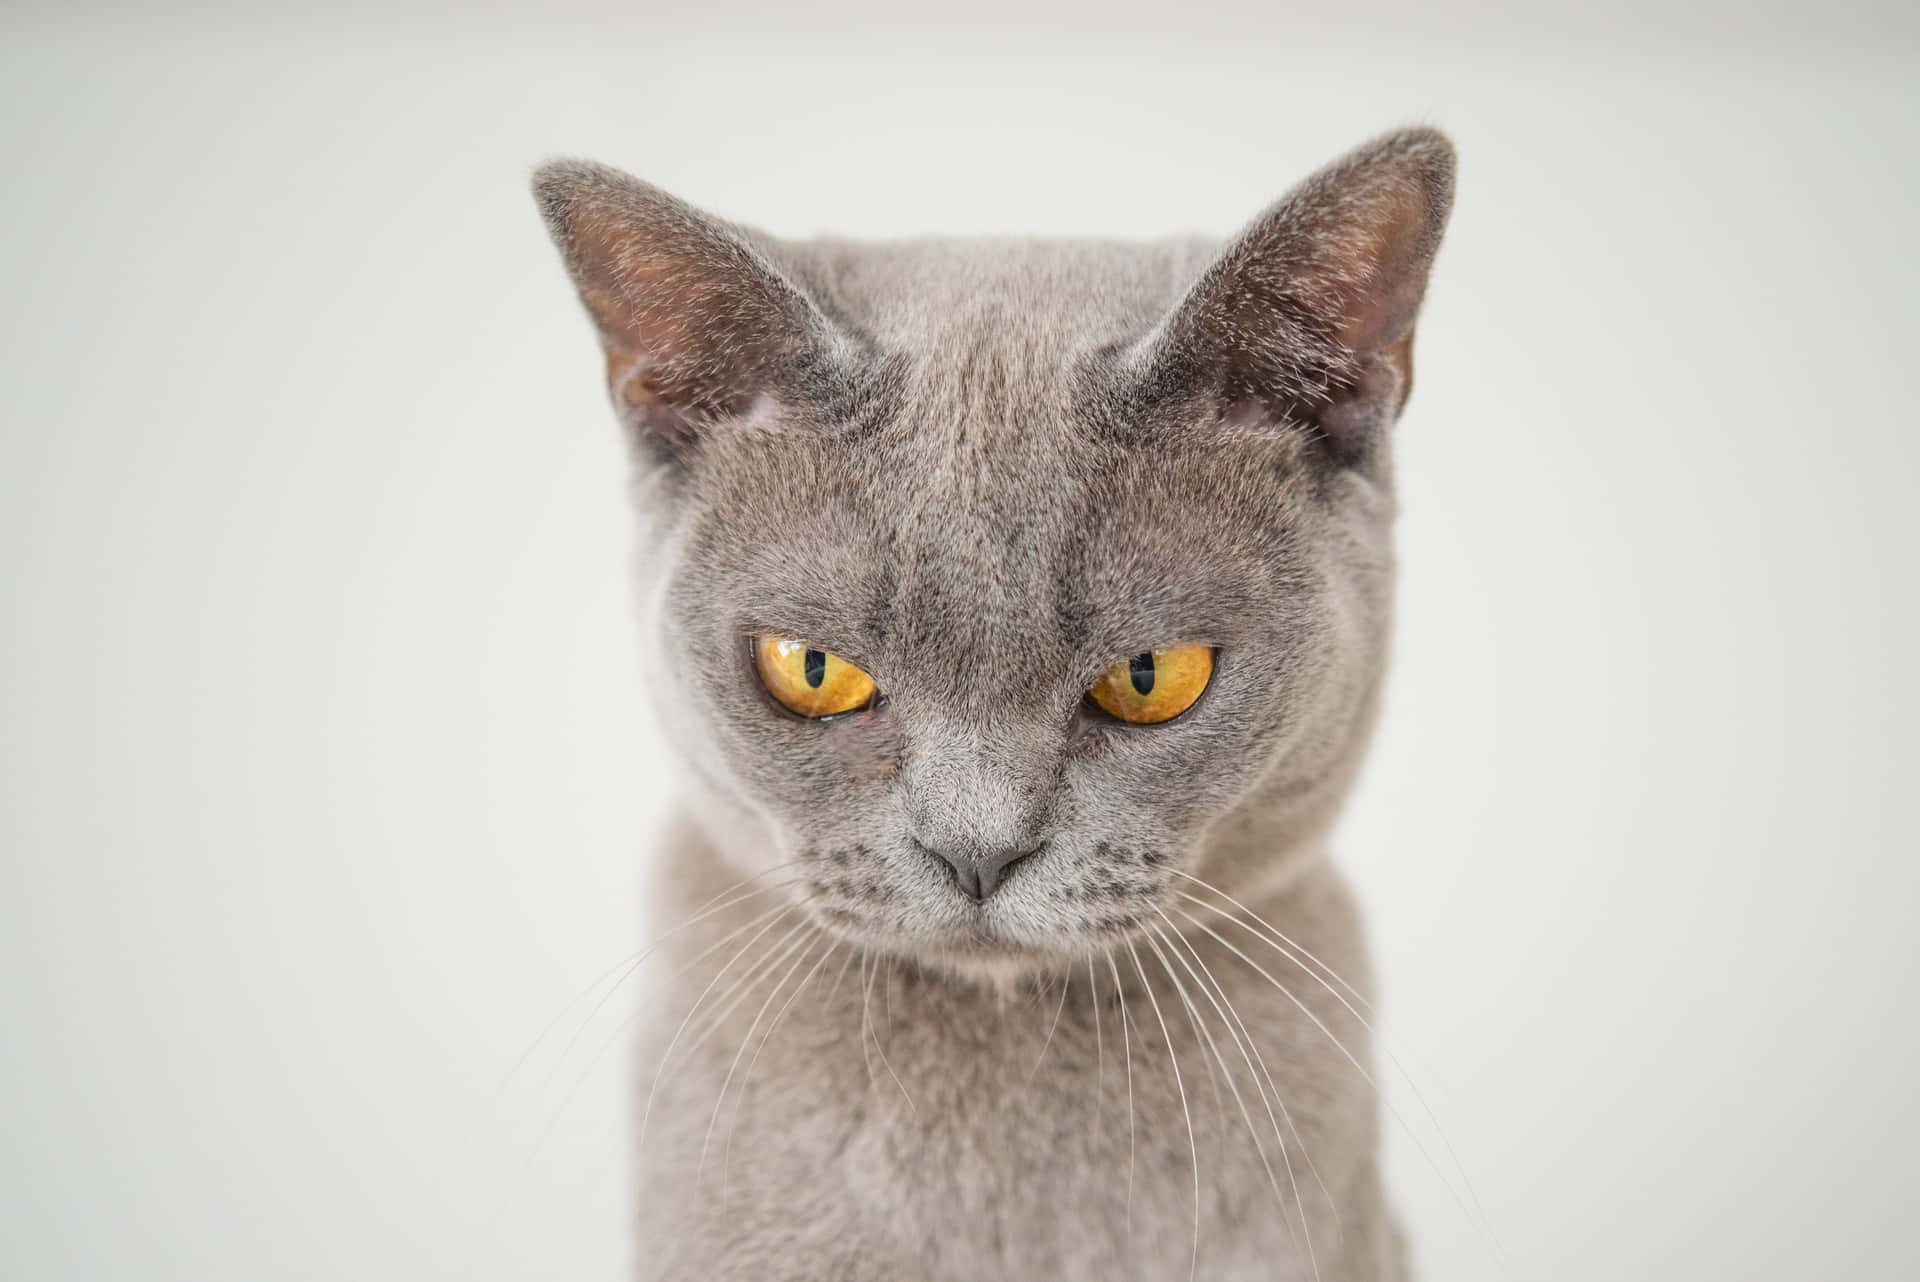 A Gray Cat With Yellow Eyes Is Looking At The Camera